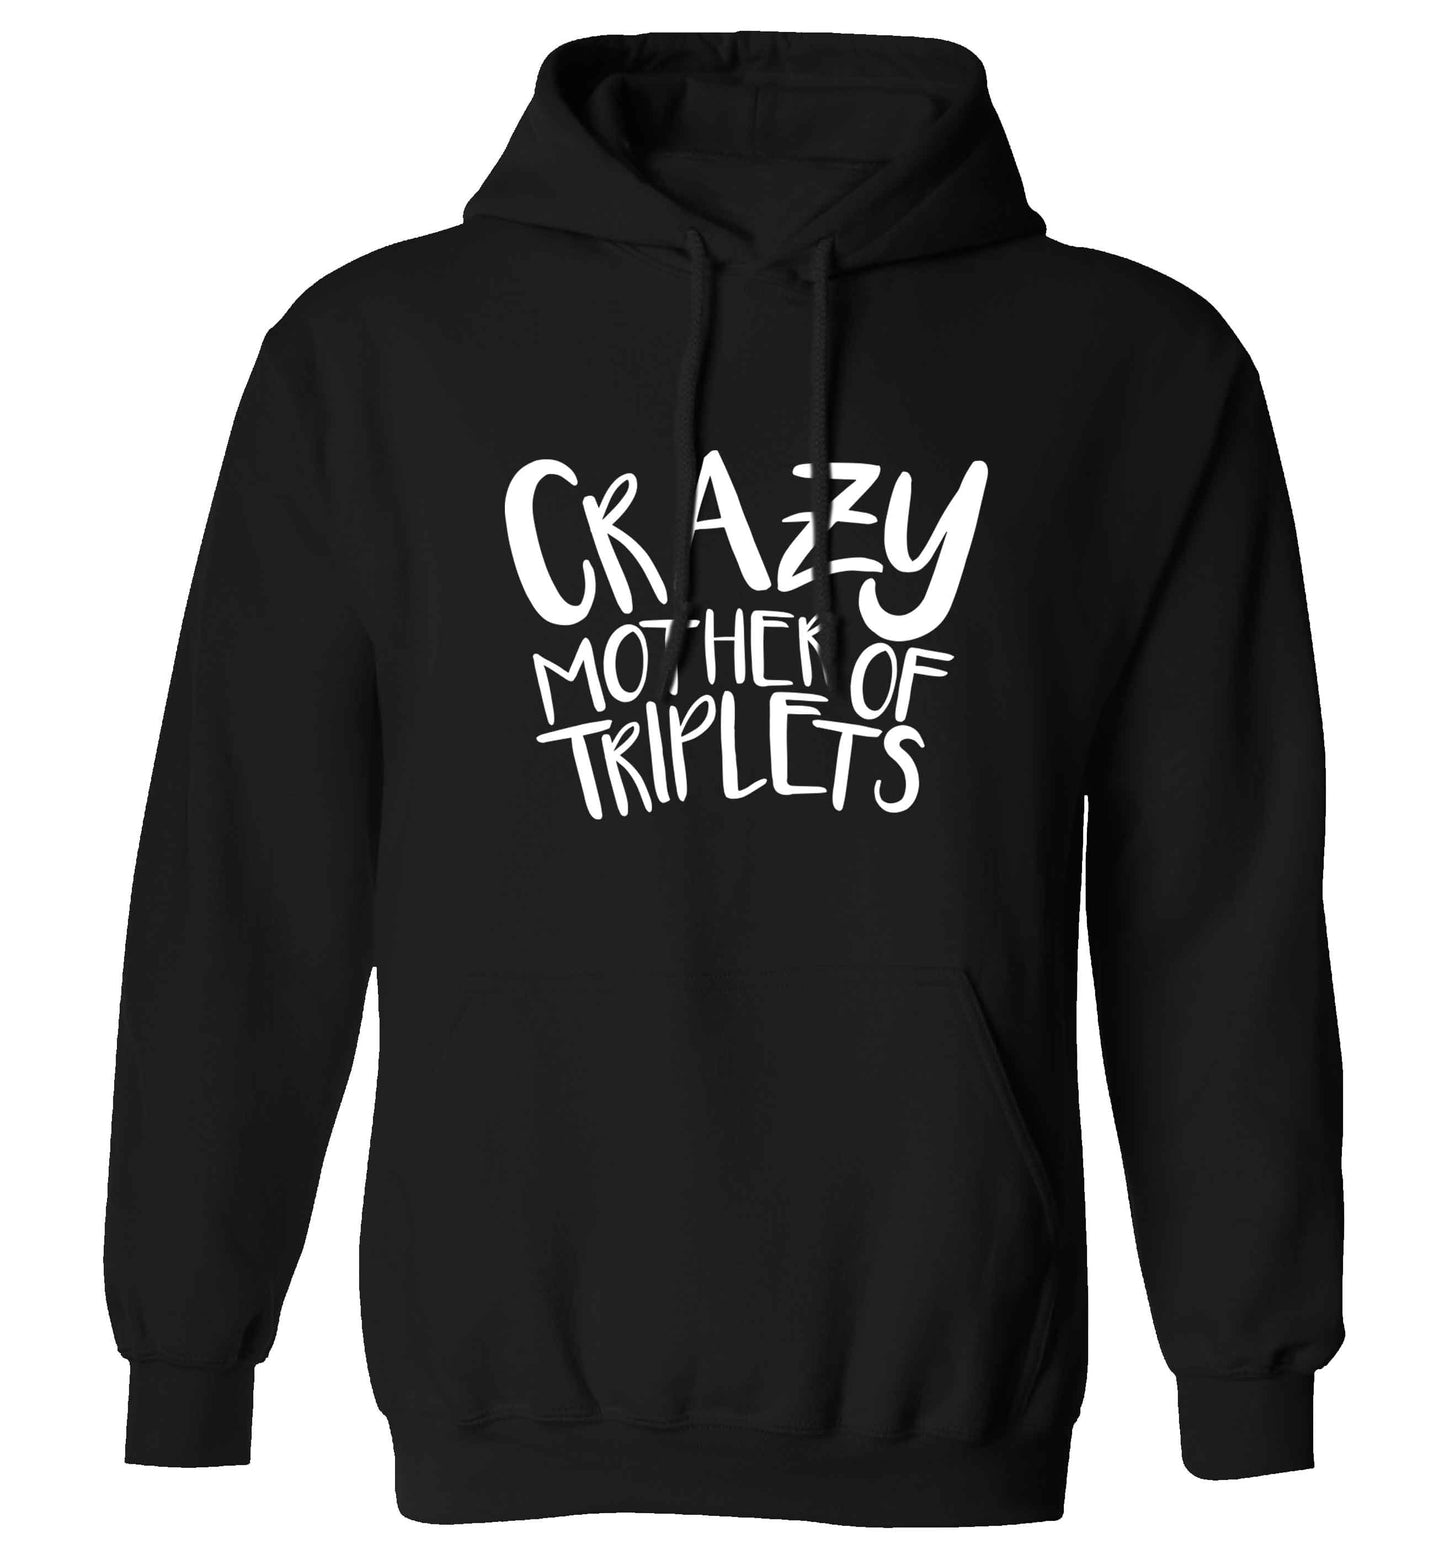 Crazy mother of triplets adults unisex black hoodie 2XL